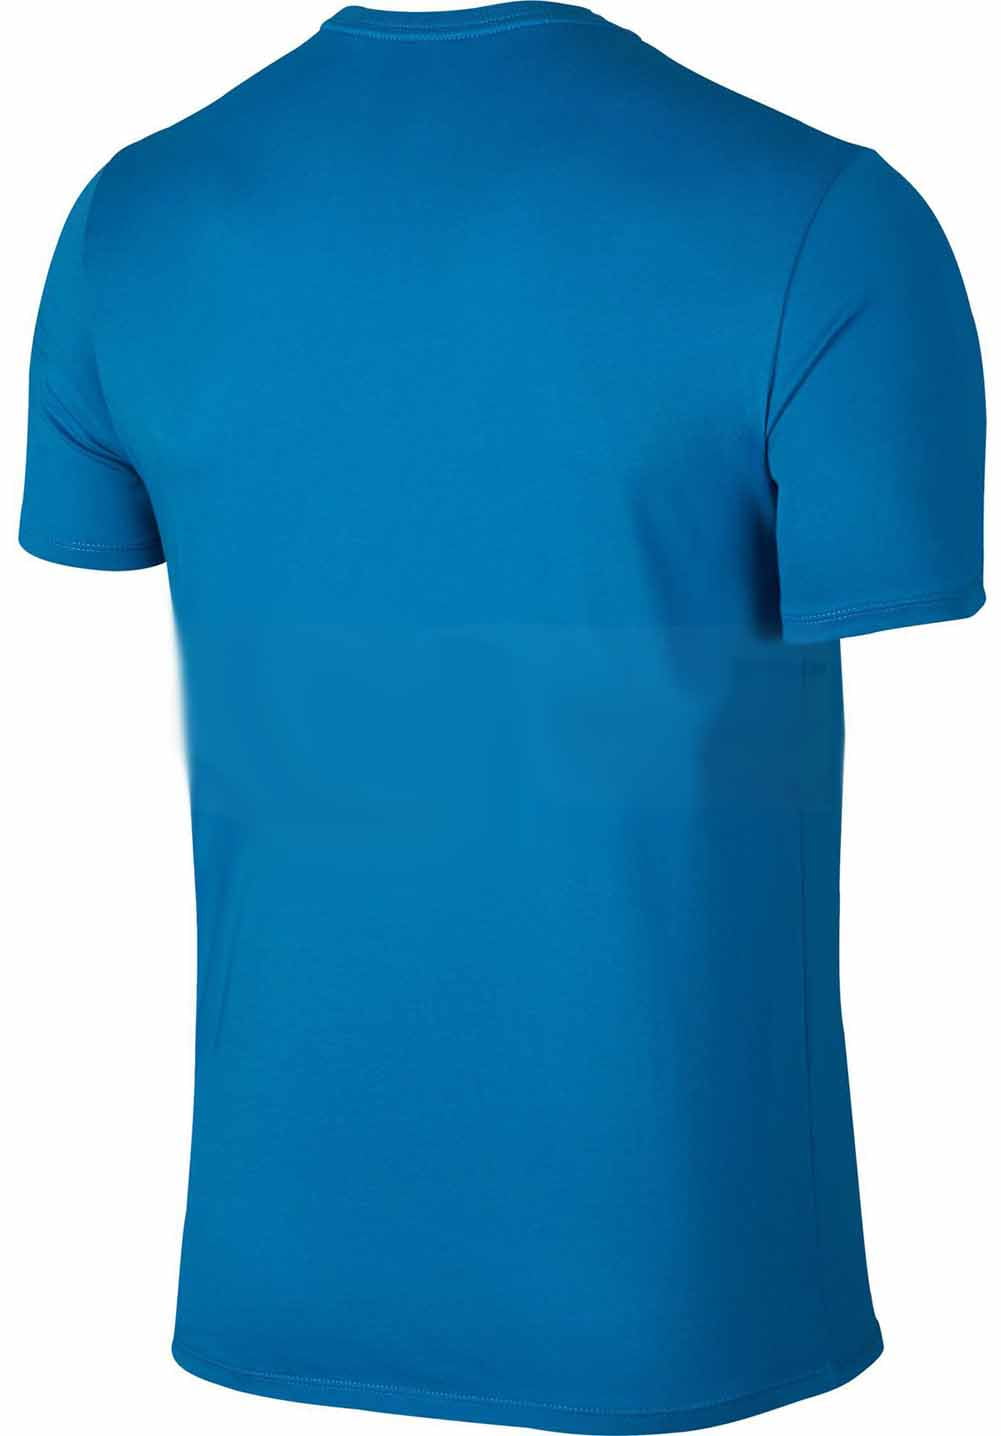 Nike - NEW Nike Golf Graphic Tee LT Photo Blue/Reflective Silver XL ...